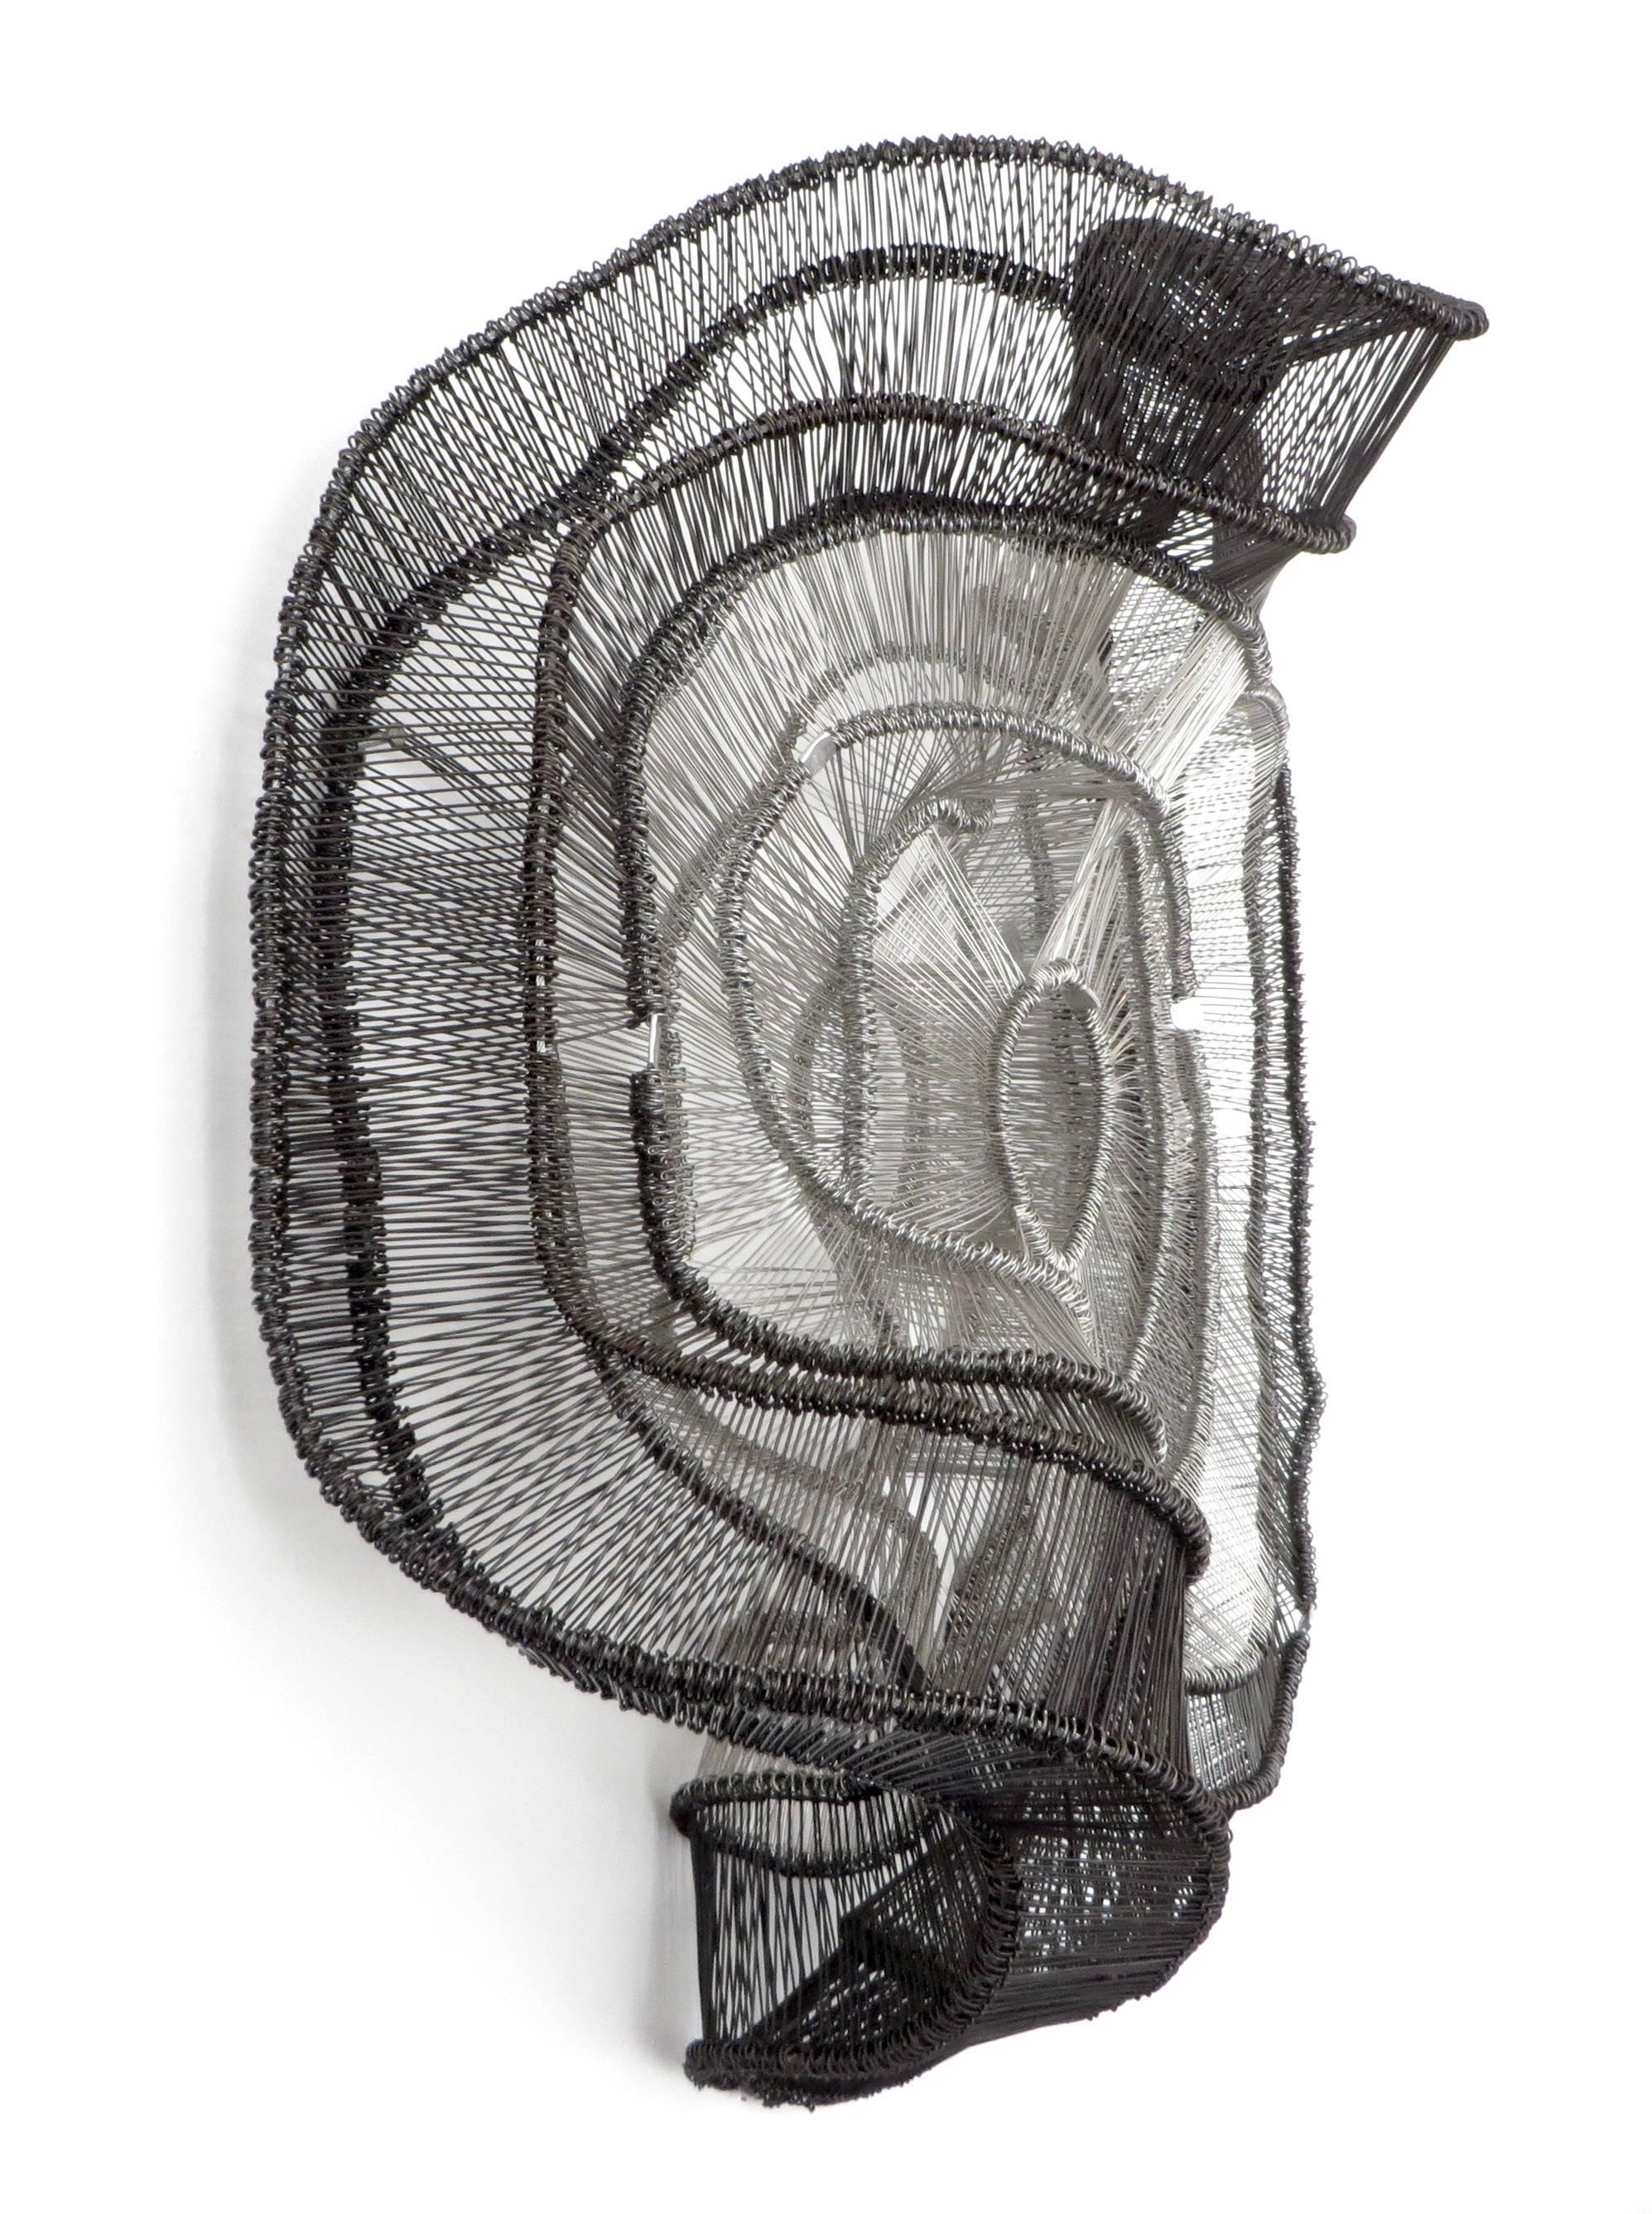 Eric Gushee woven wire metal wall sculpture in an Ombre motif of silver gray and black from the Emergence series. Large undulating metal woven wire that undulates from the wall. From the most recent new work. Available now. 
Eric Gushee is an artist